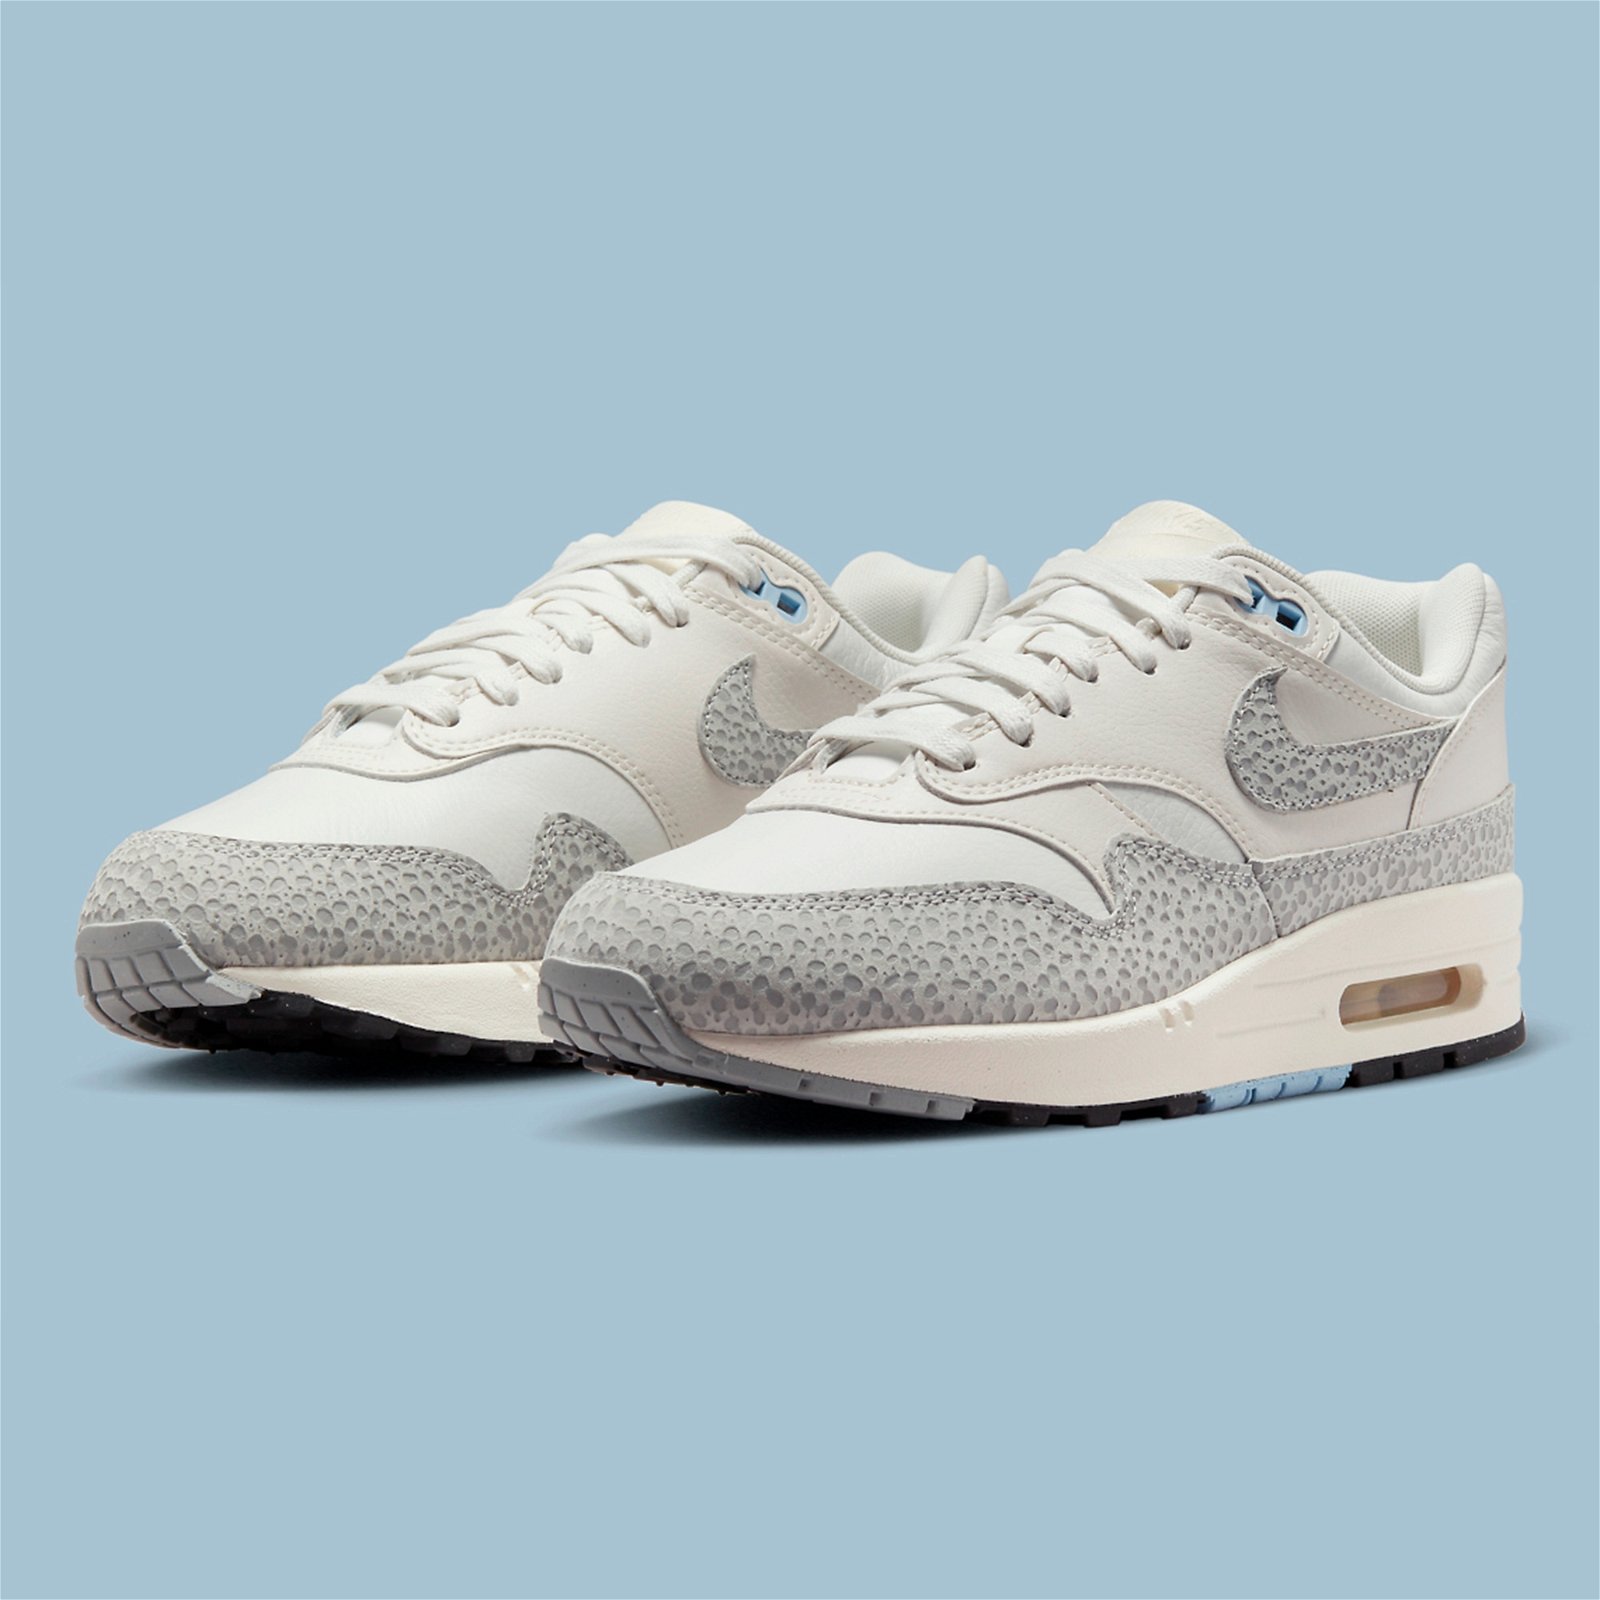 Sneaker of the Week by FlexDog - Nike Air Max 1 SFR “Summit White"